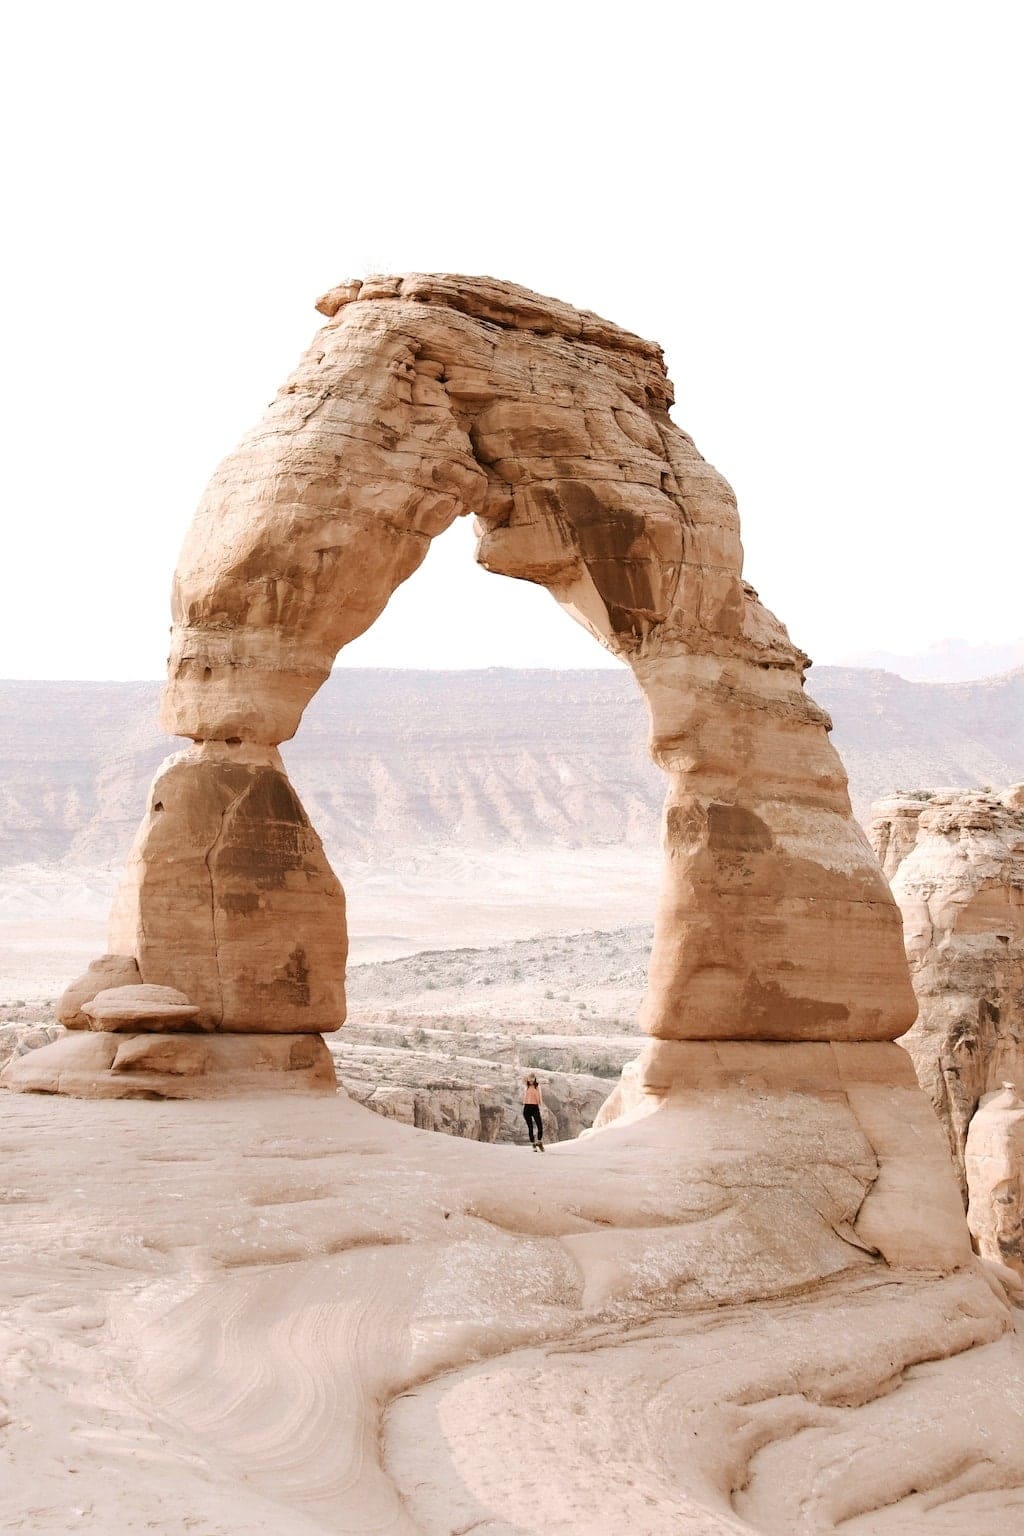 9 Incredible Things to See in Arches National Park